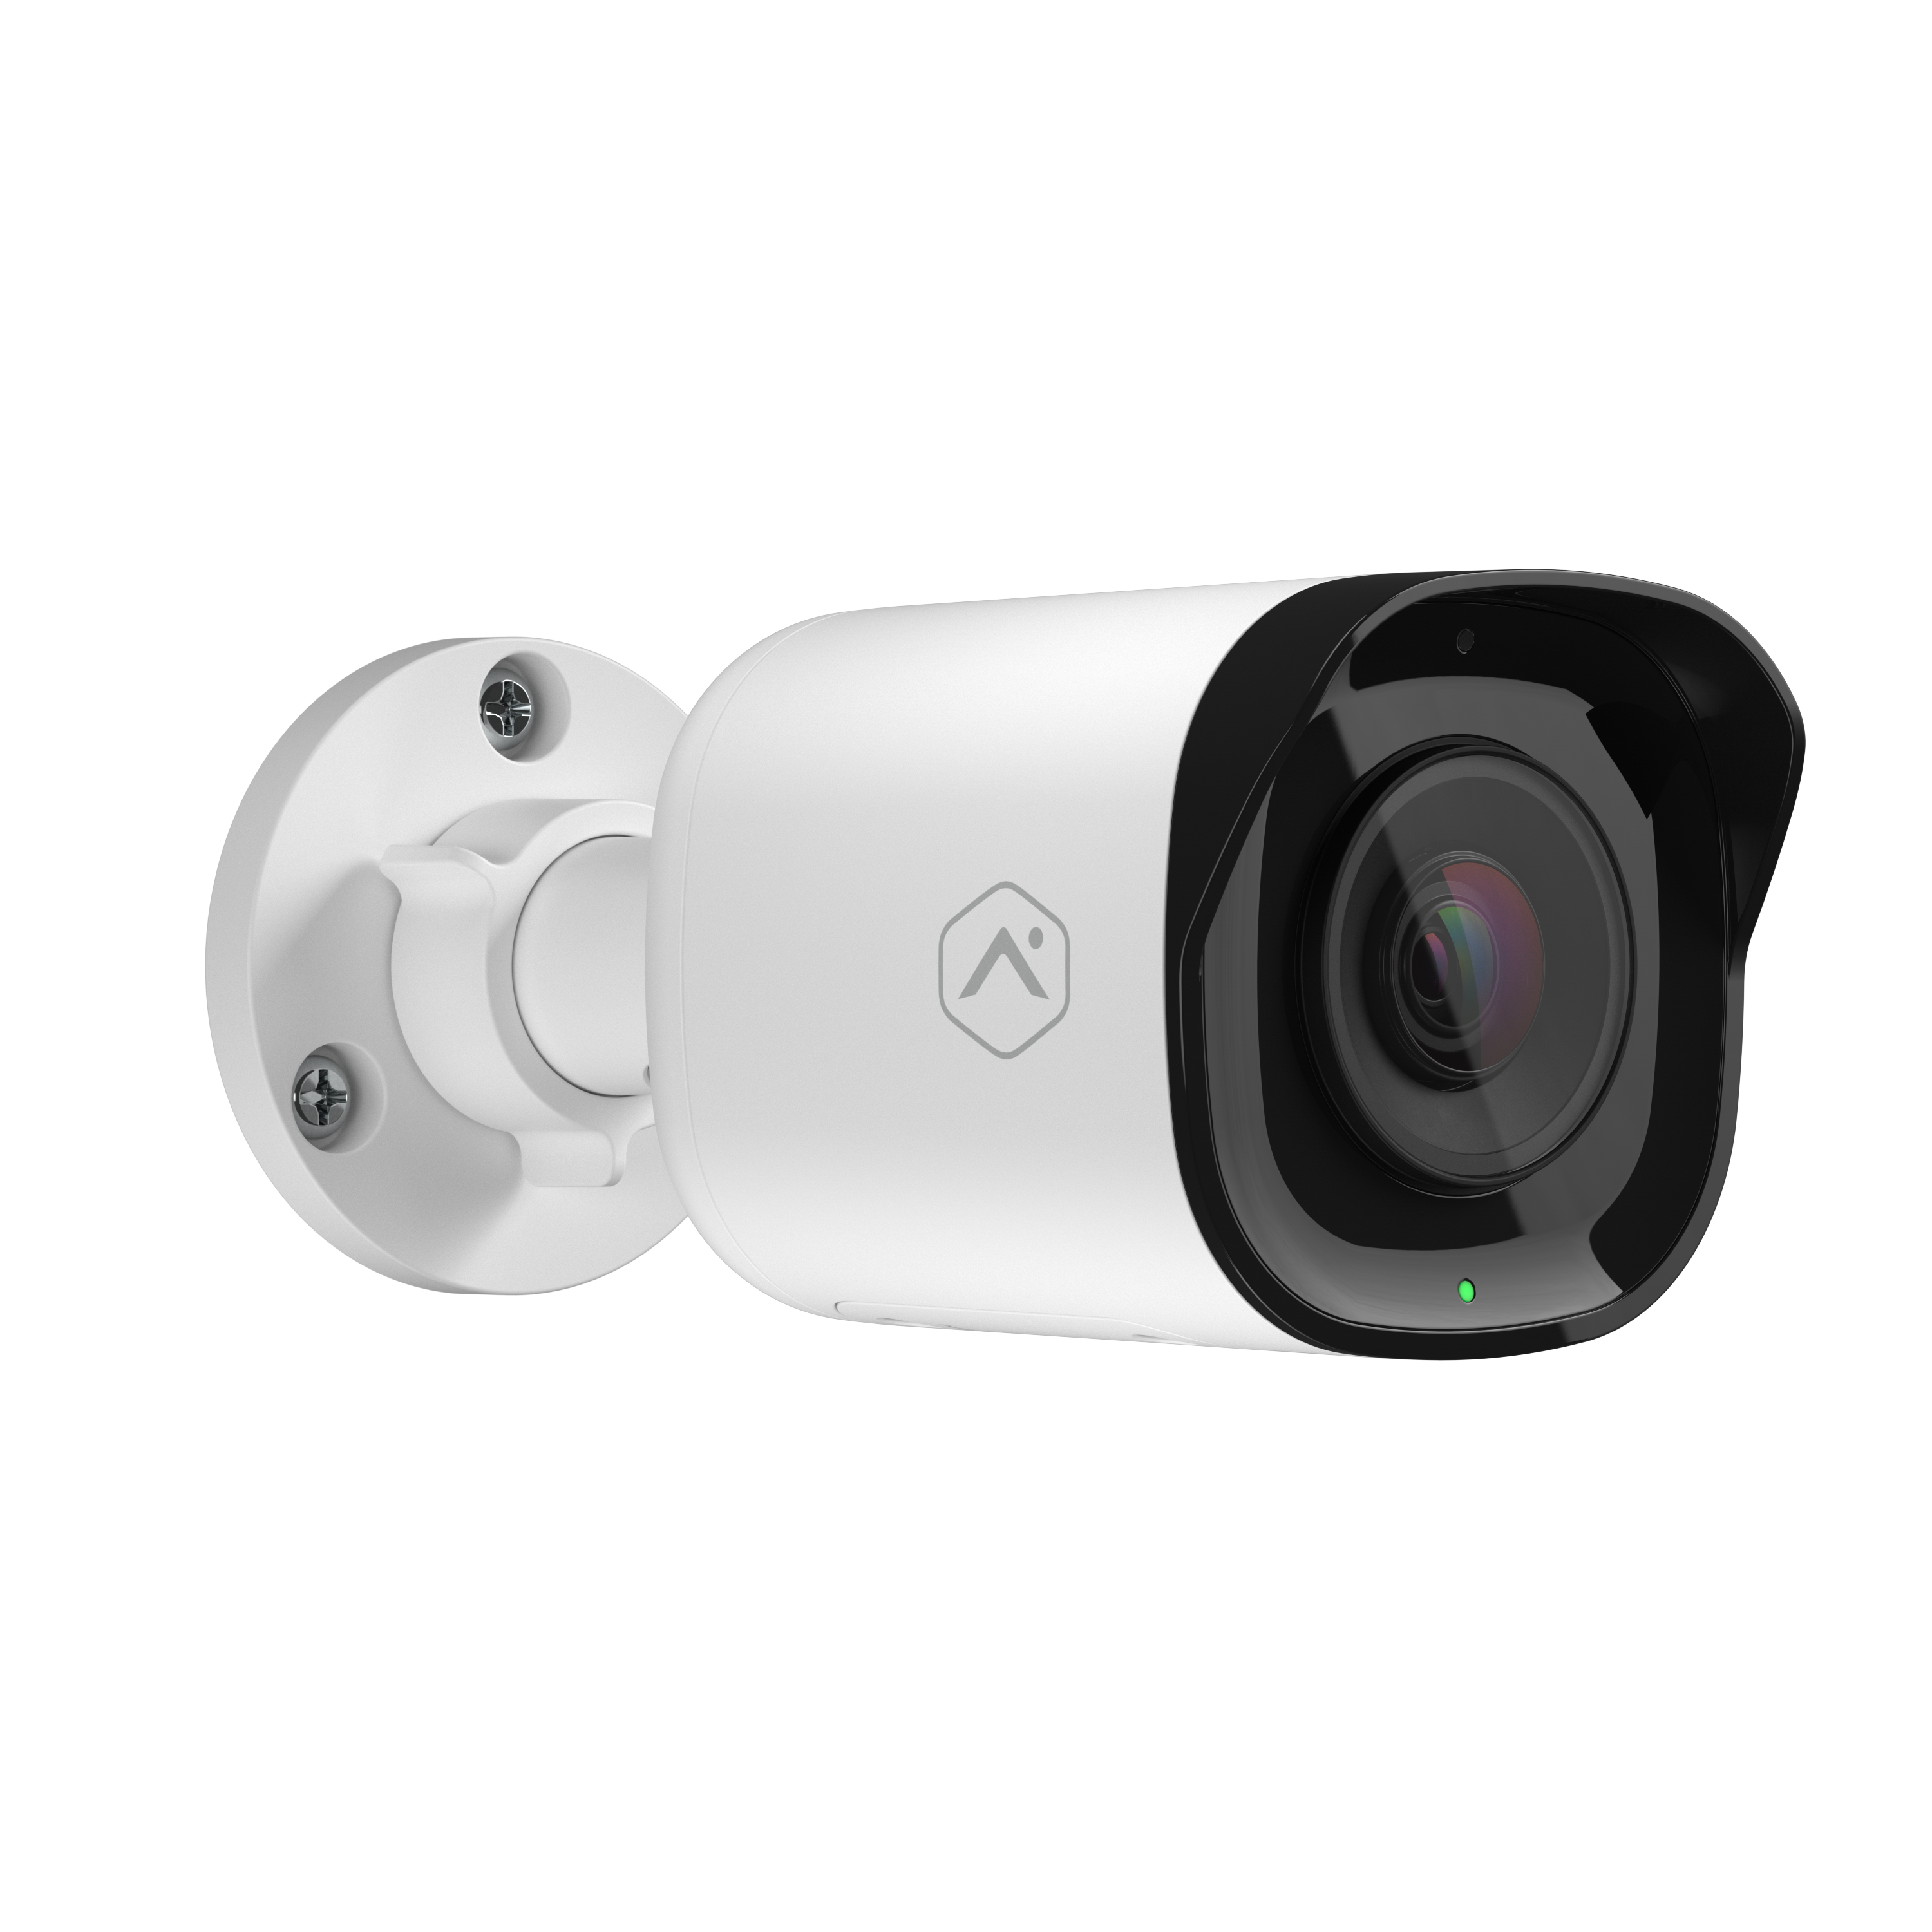 VC728 Outdoor Security Camera